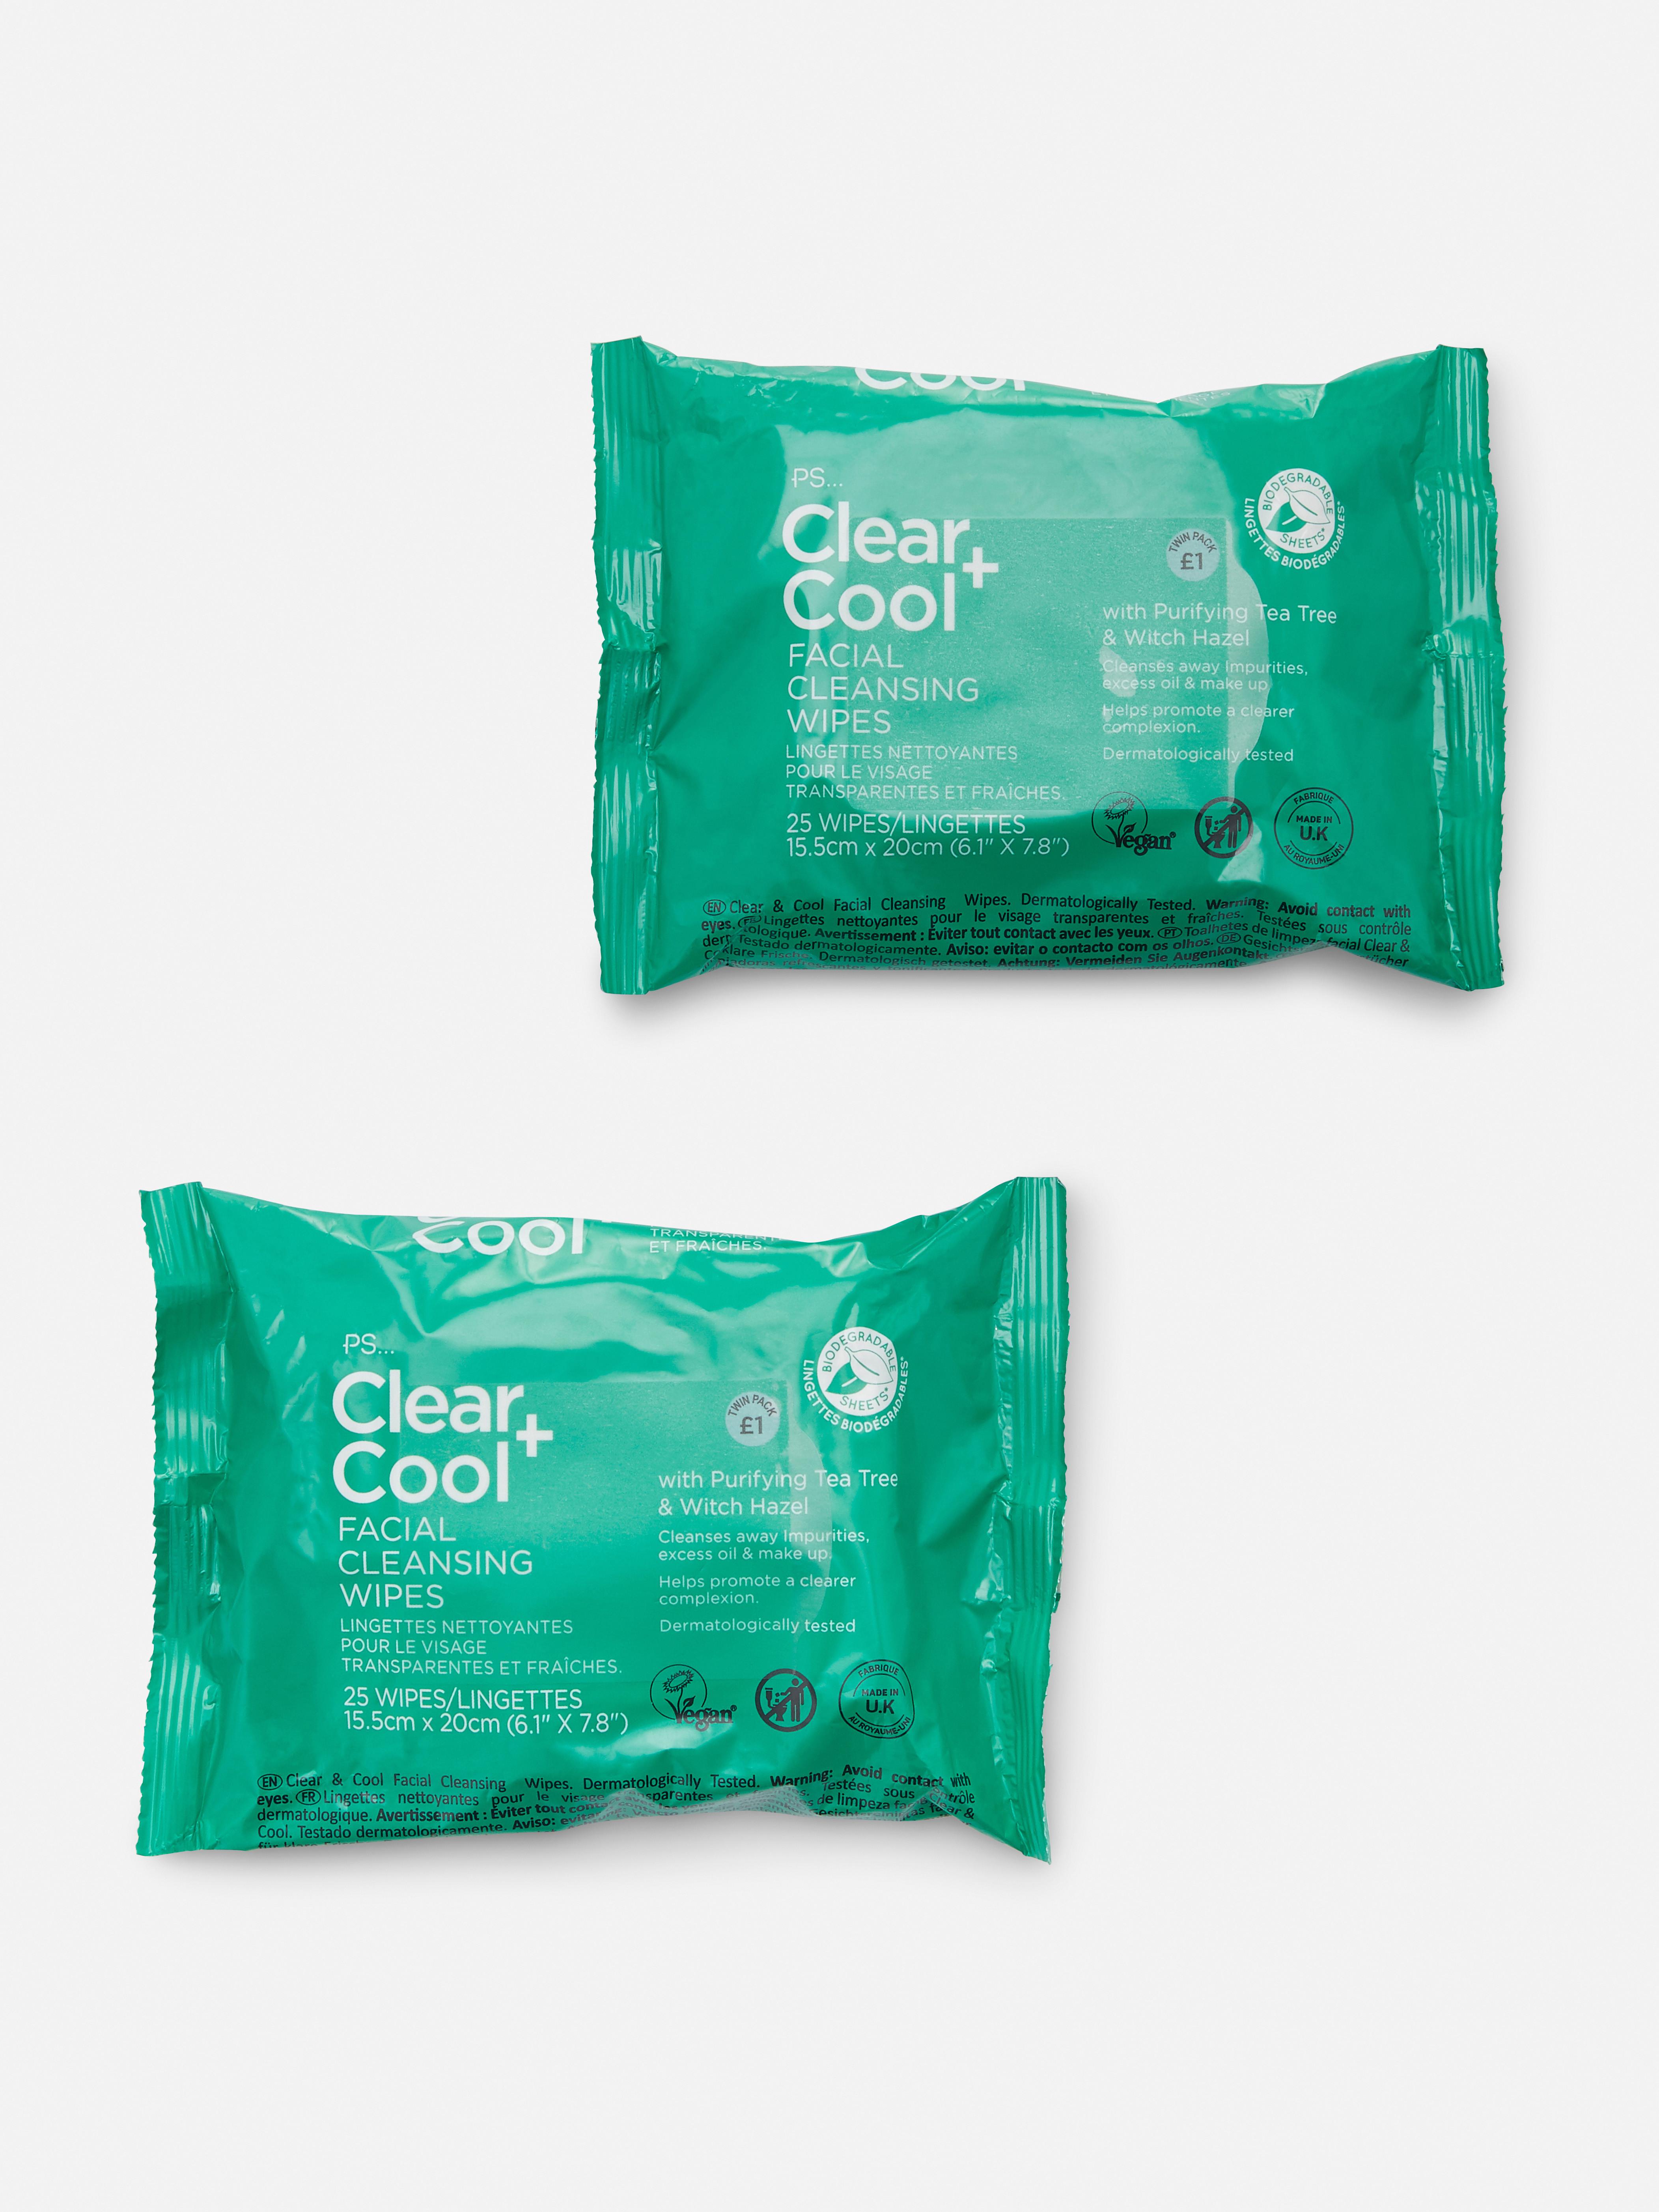 PS... Bio Clear and Cool Facial Cleansing Wipes Green